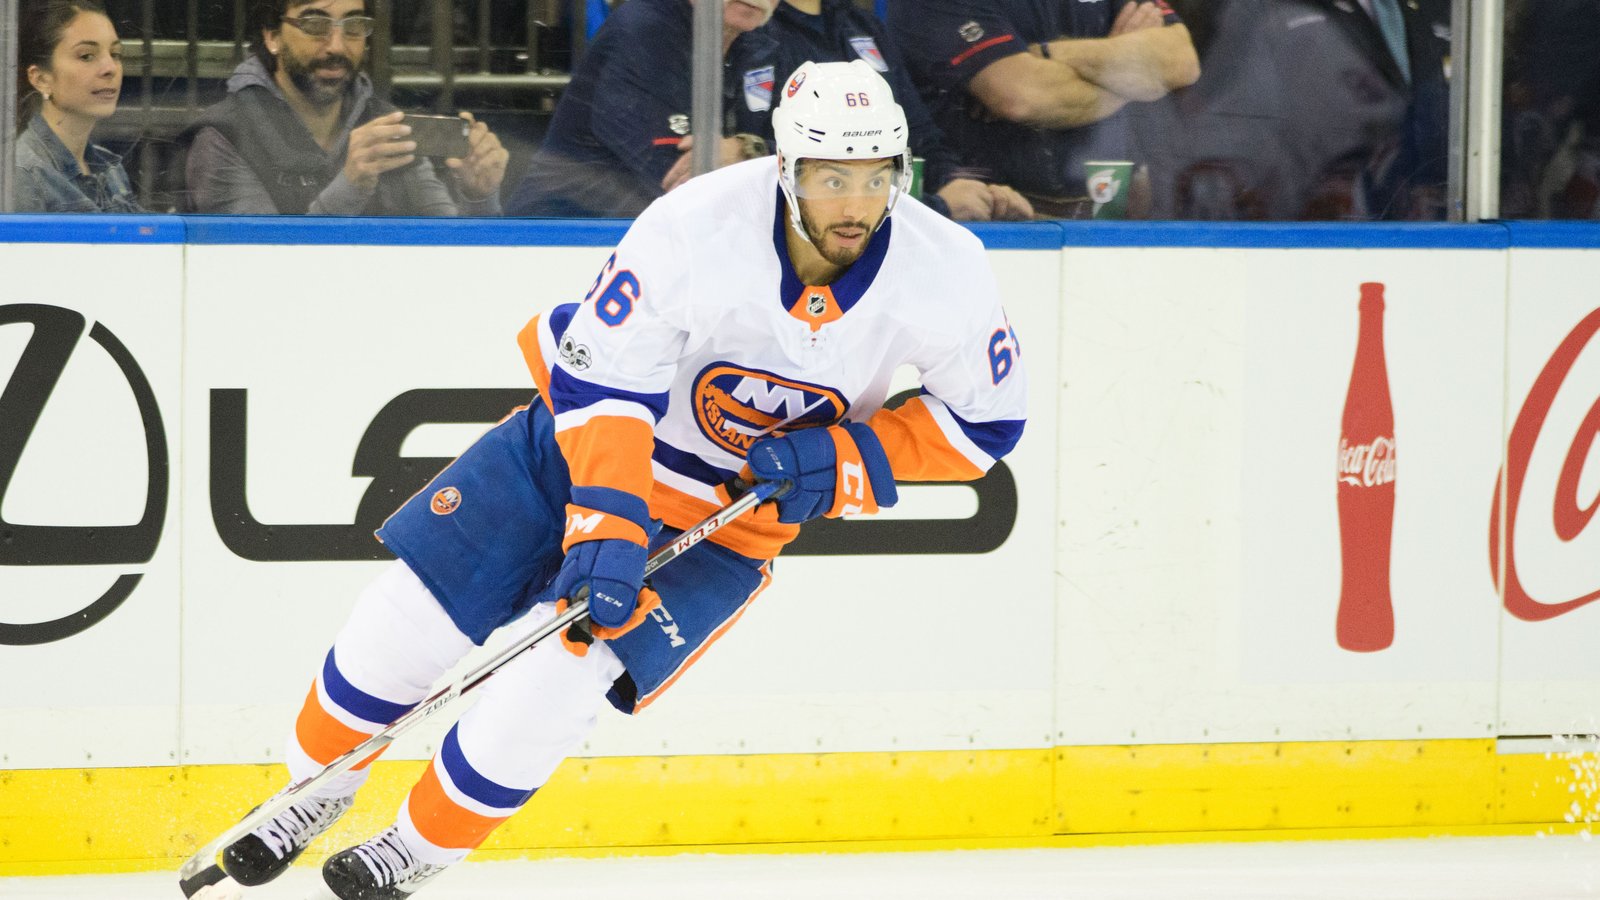 The Islanders appear to be done with Josh Ho-Sang